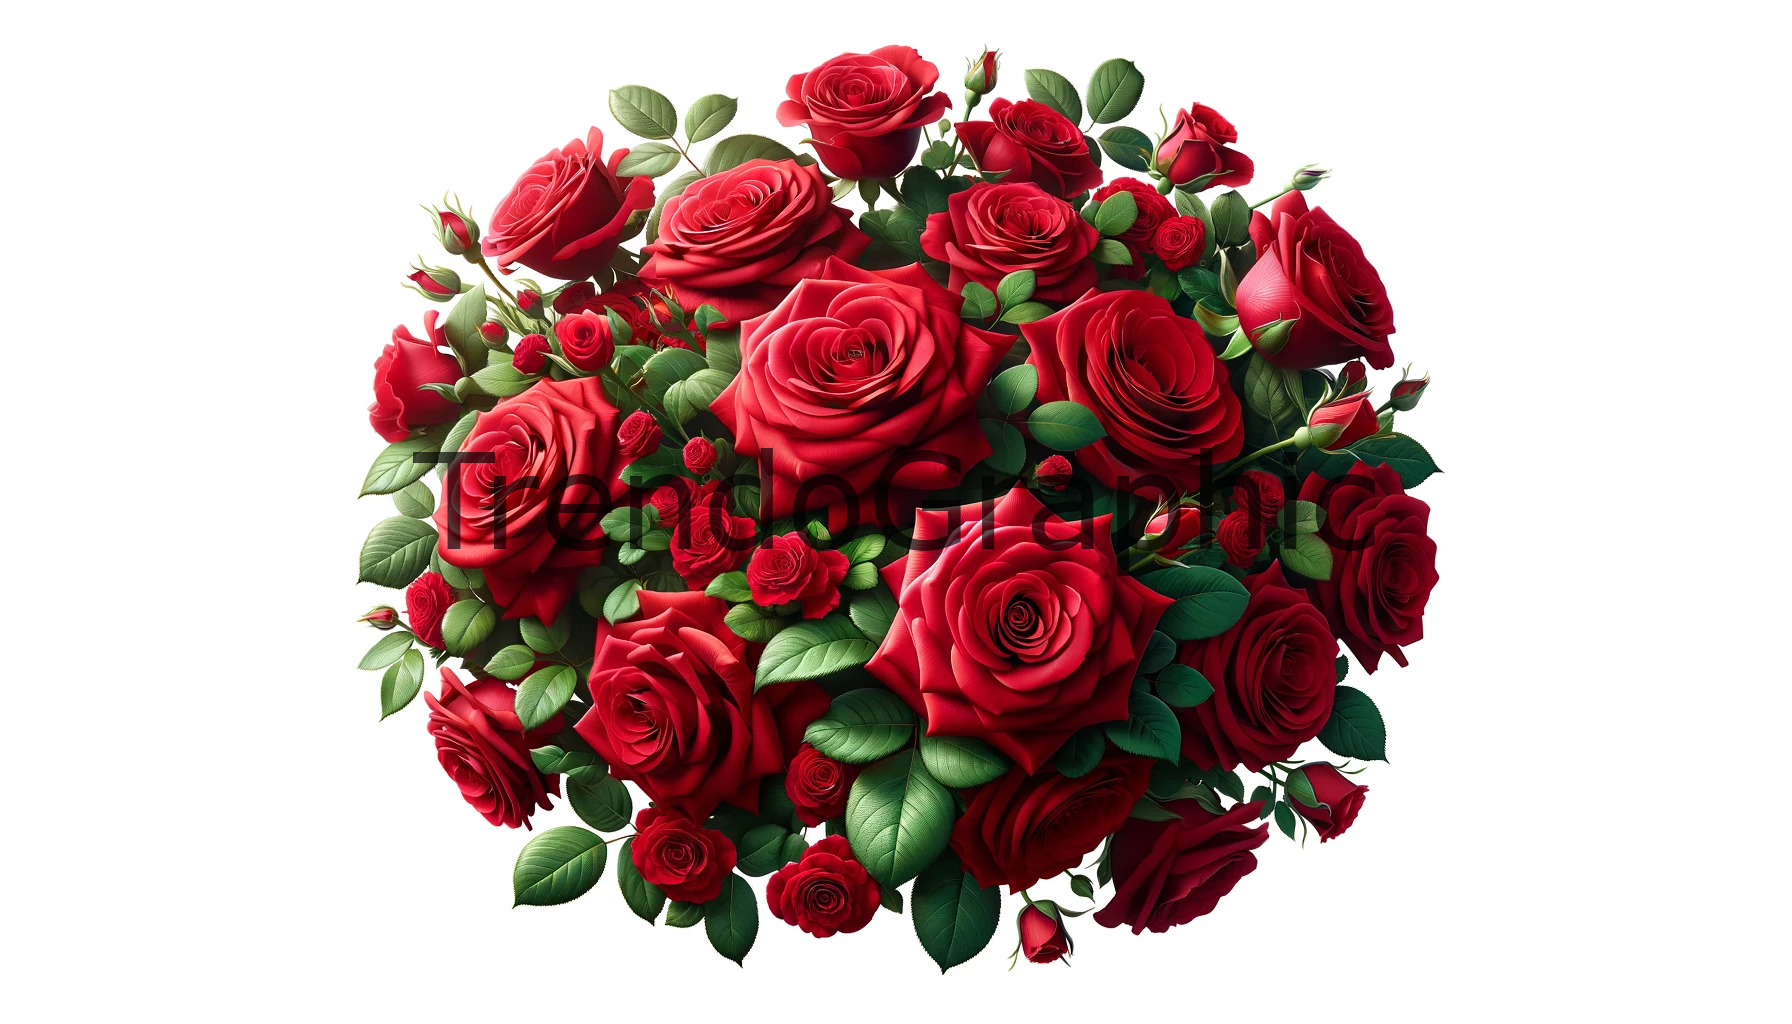 Lush Red Roses Array – A Captivating Floral Masterpiece